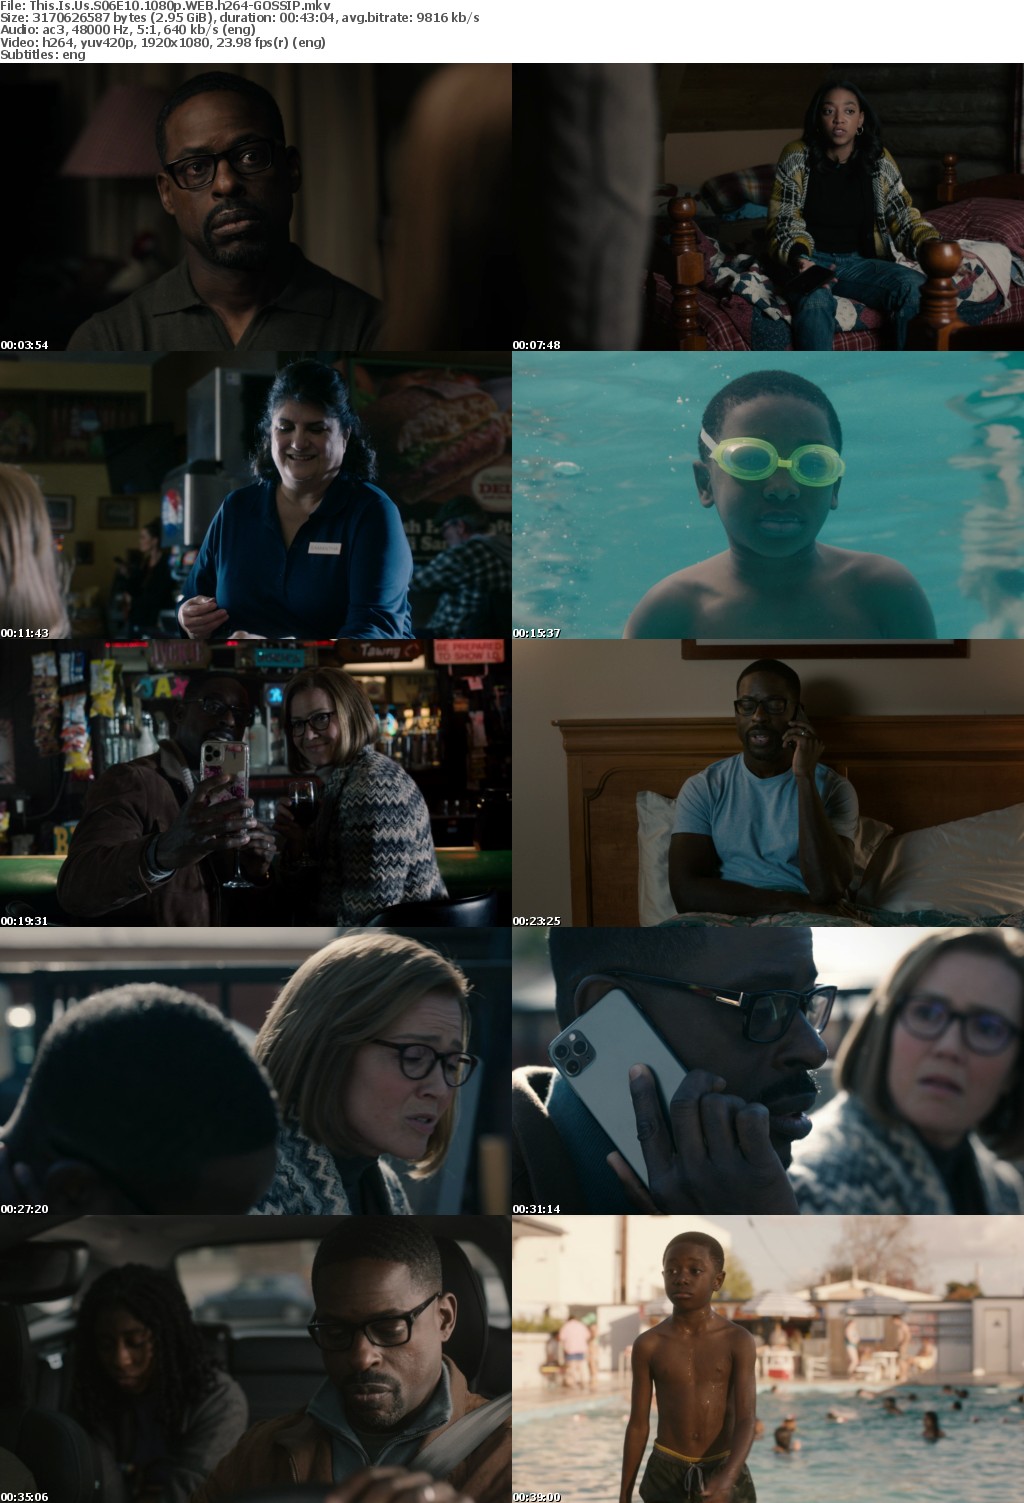 This Is Us S06E10 1080p WEB h264-GOSSIP